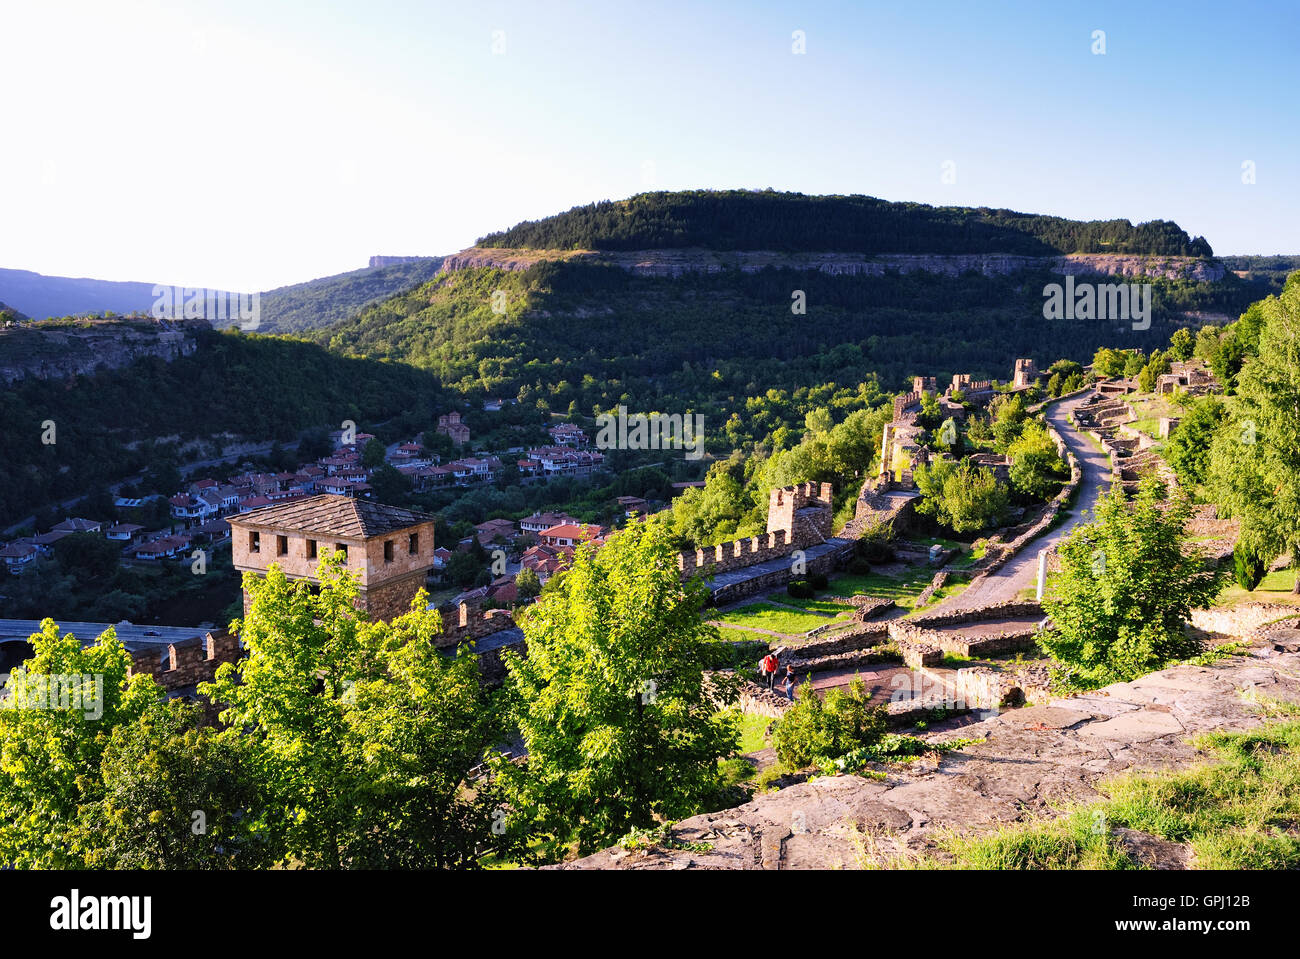 Veliko Tarnovo (Tyrnovo) - Ancient Bulgarian Capital. View from the Medieval Fortress Tsarevets. Town in the Background. Stock Photo